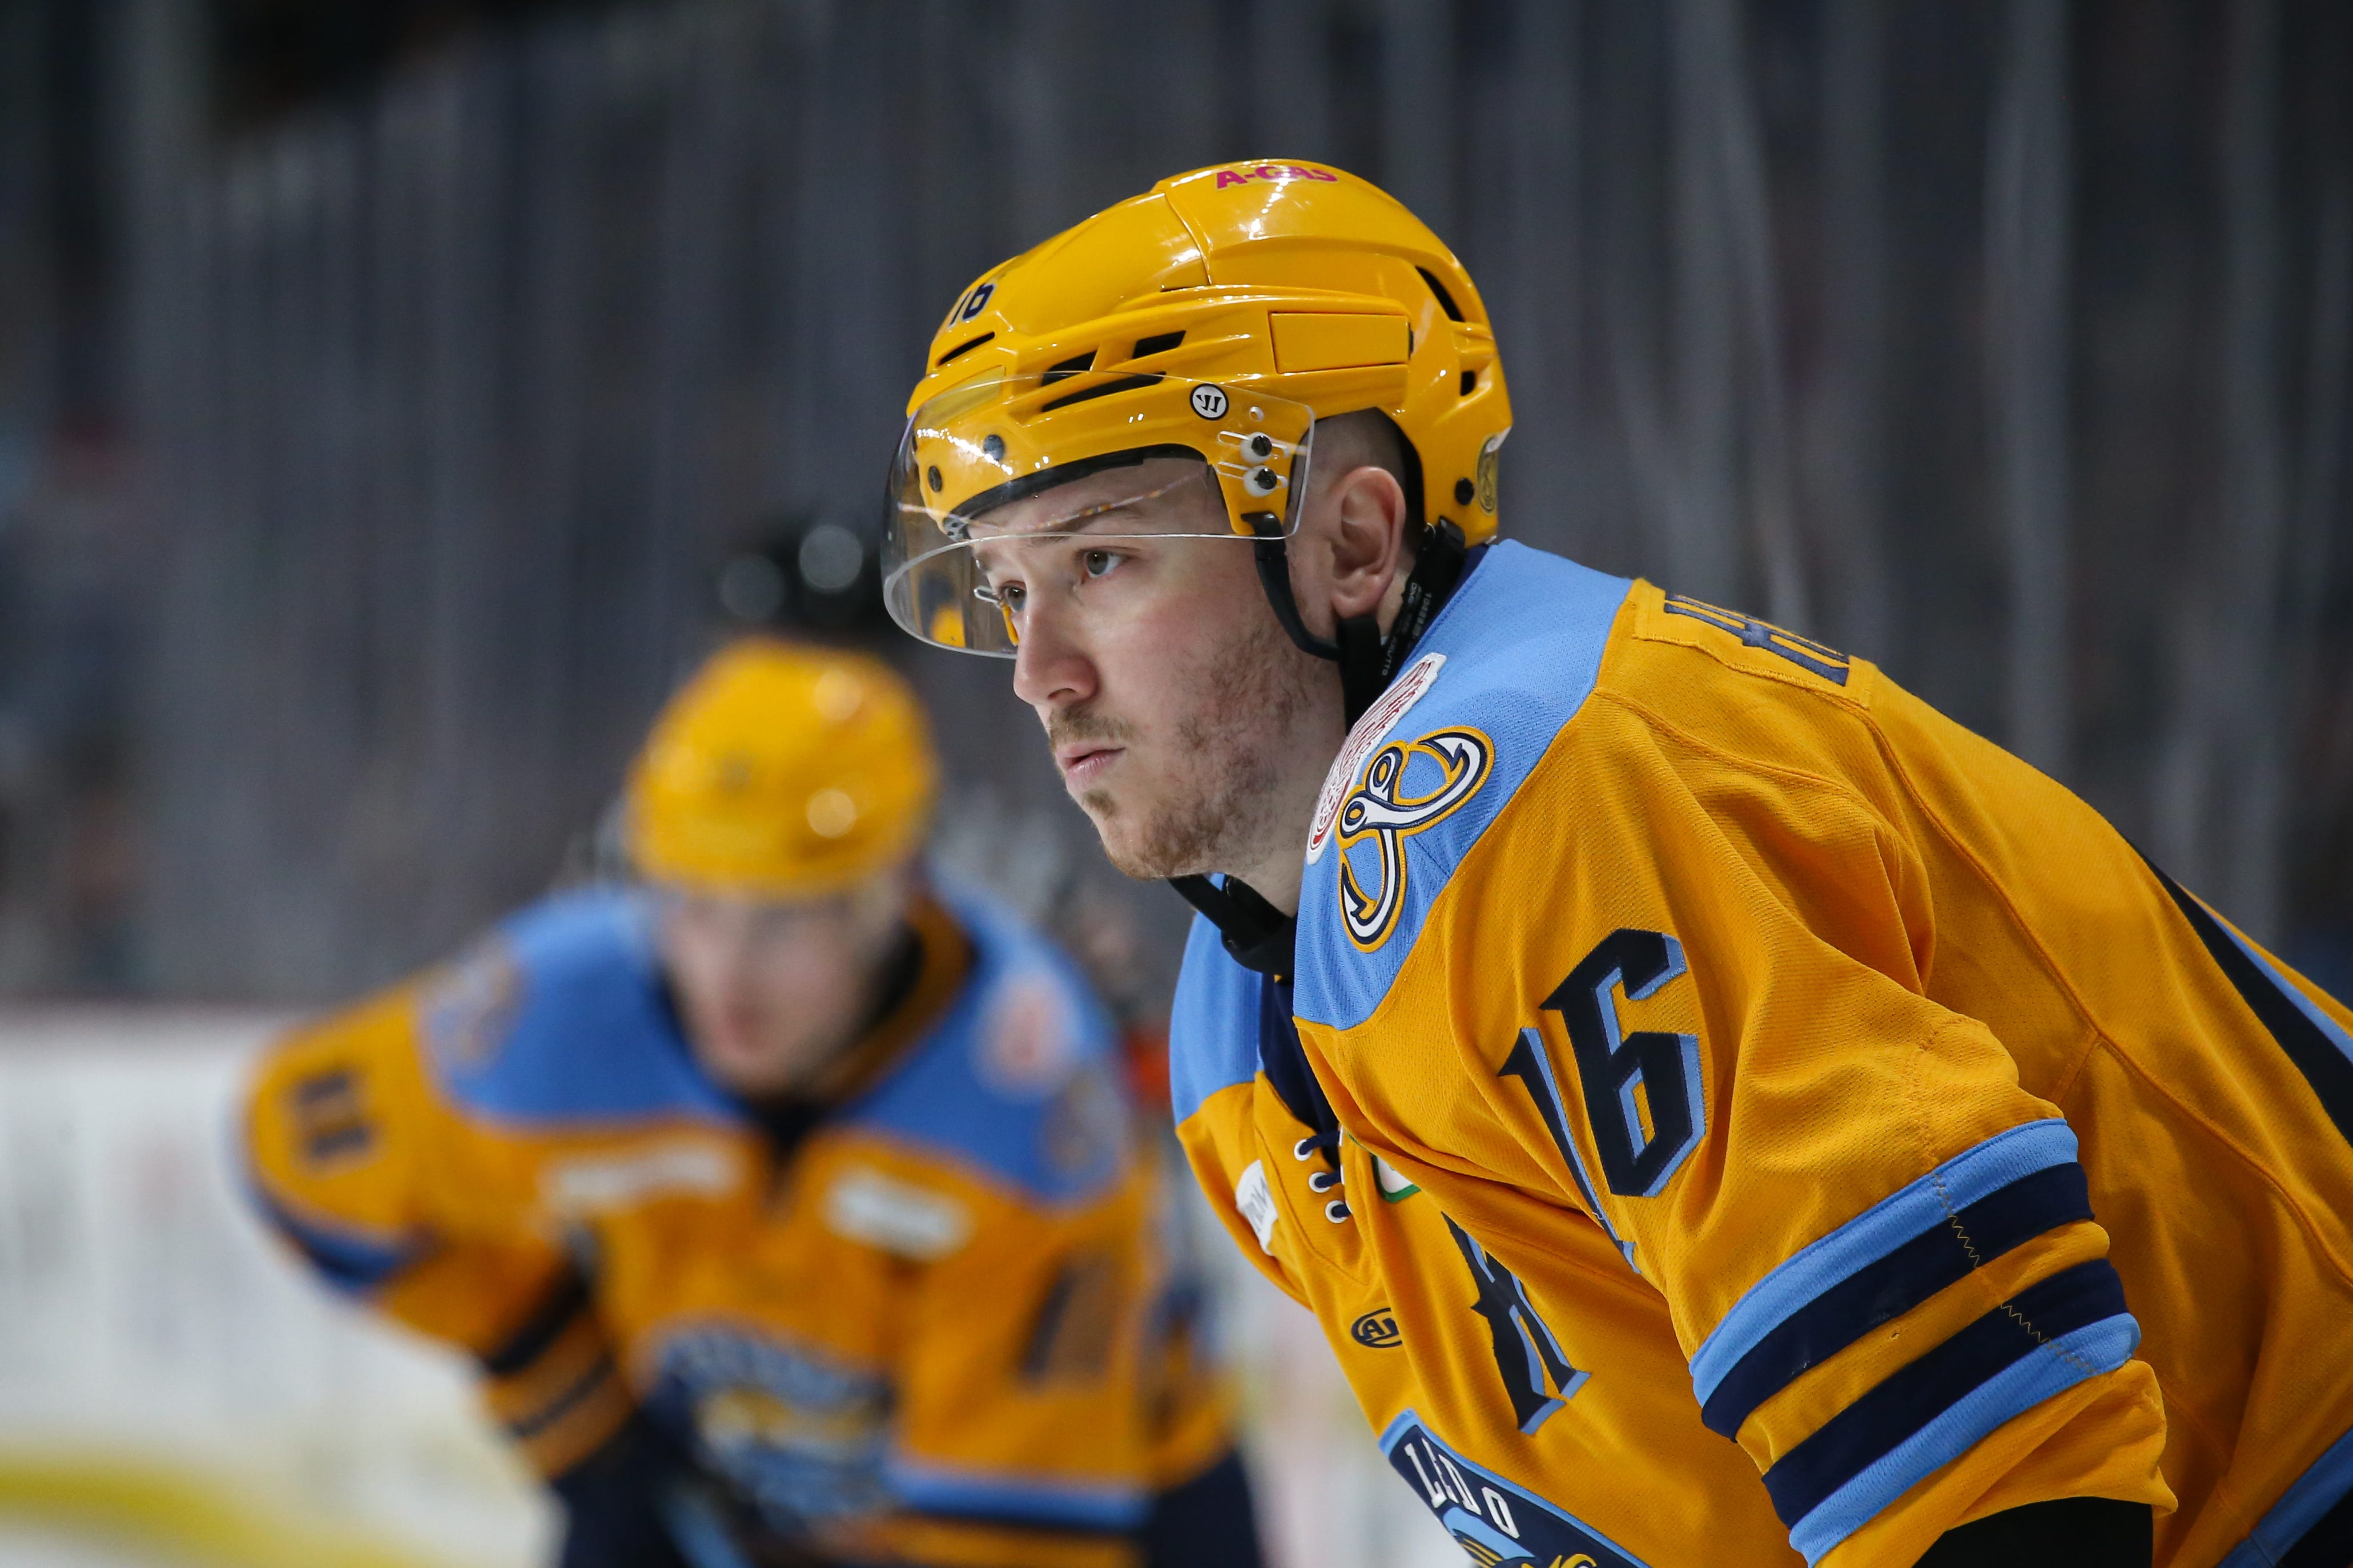 Macomb's Brandon Hawkins of the Toledo Walleye was named the ECHL most valuable player for 2023-24, as determined in a vote by ECHL coaches, broadcasters, media relations directors and media members.